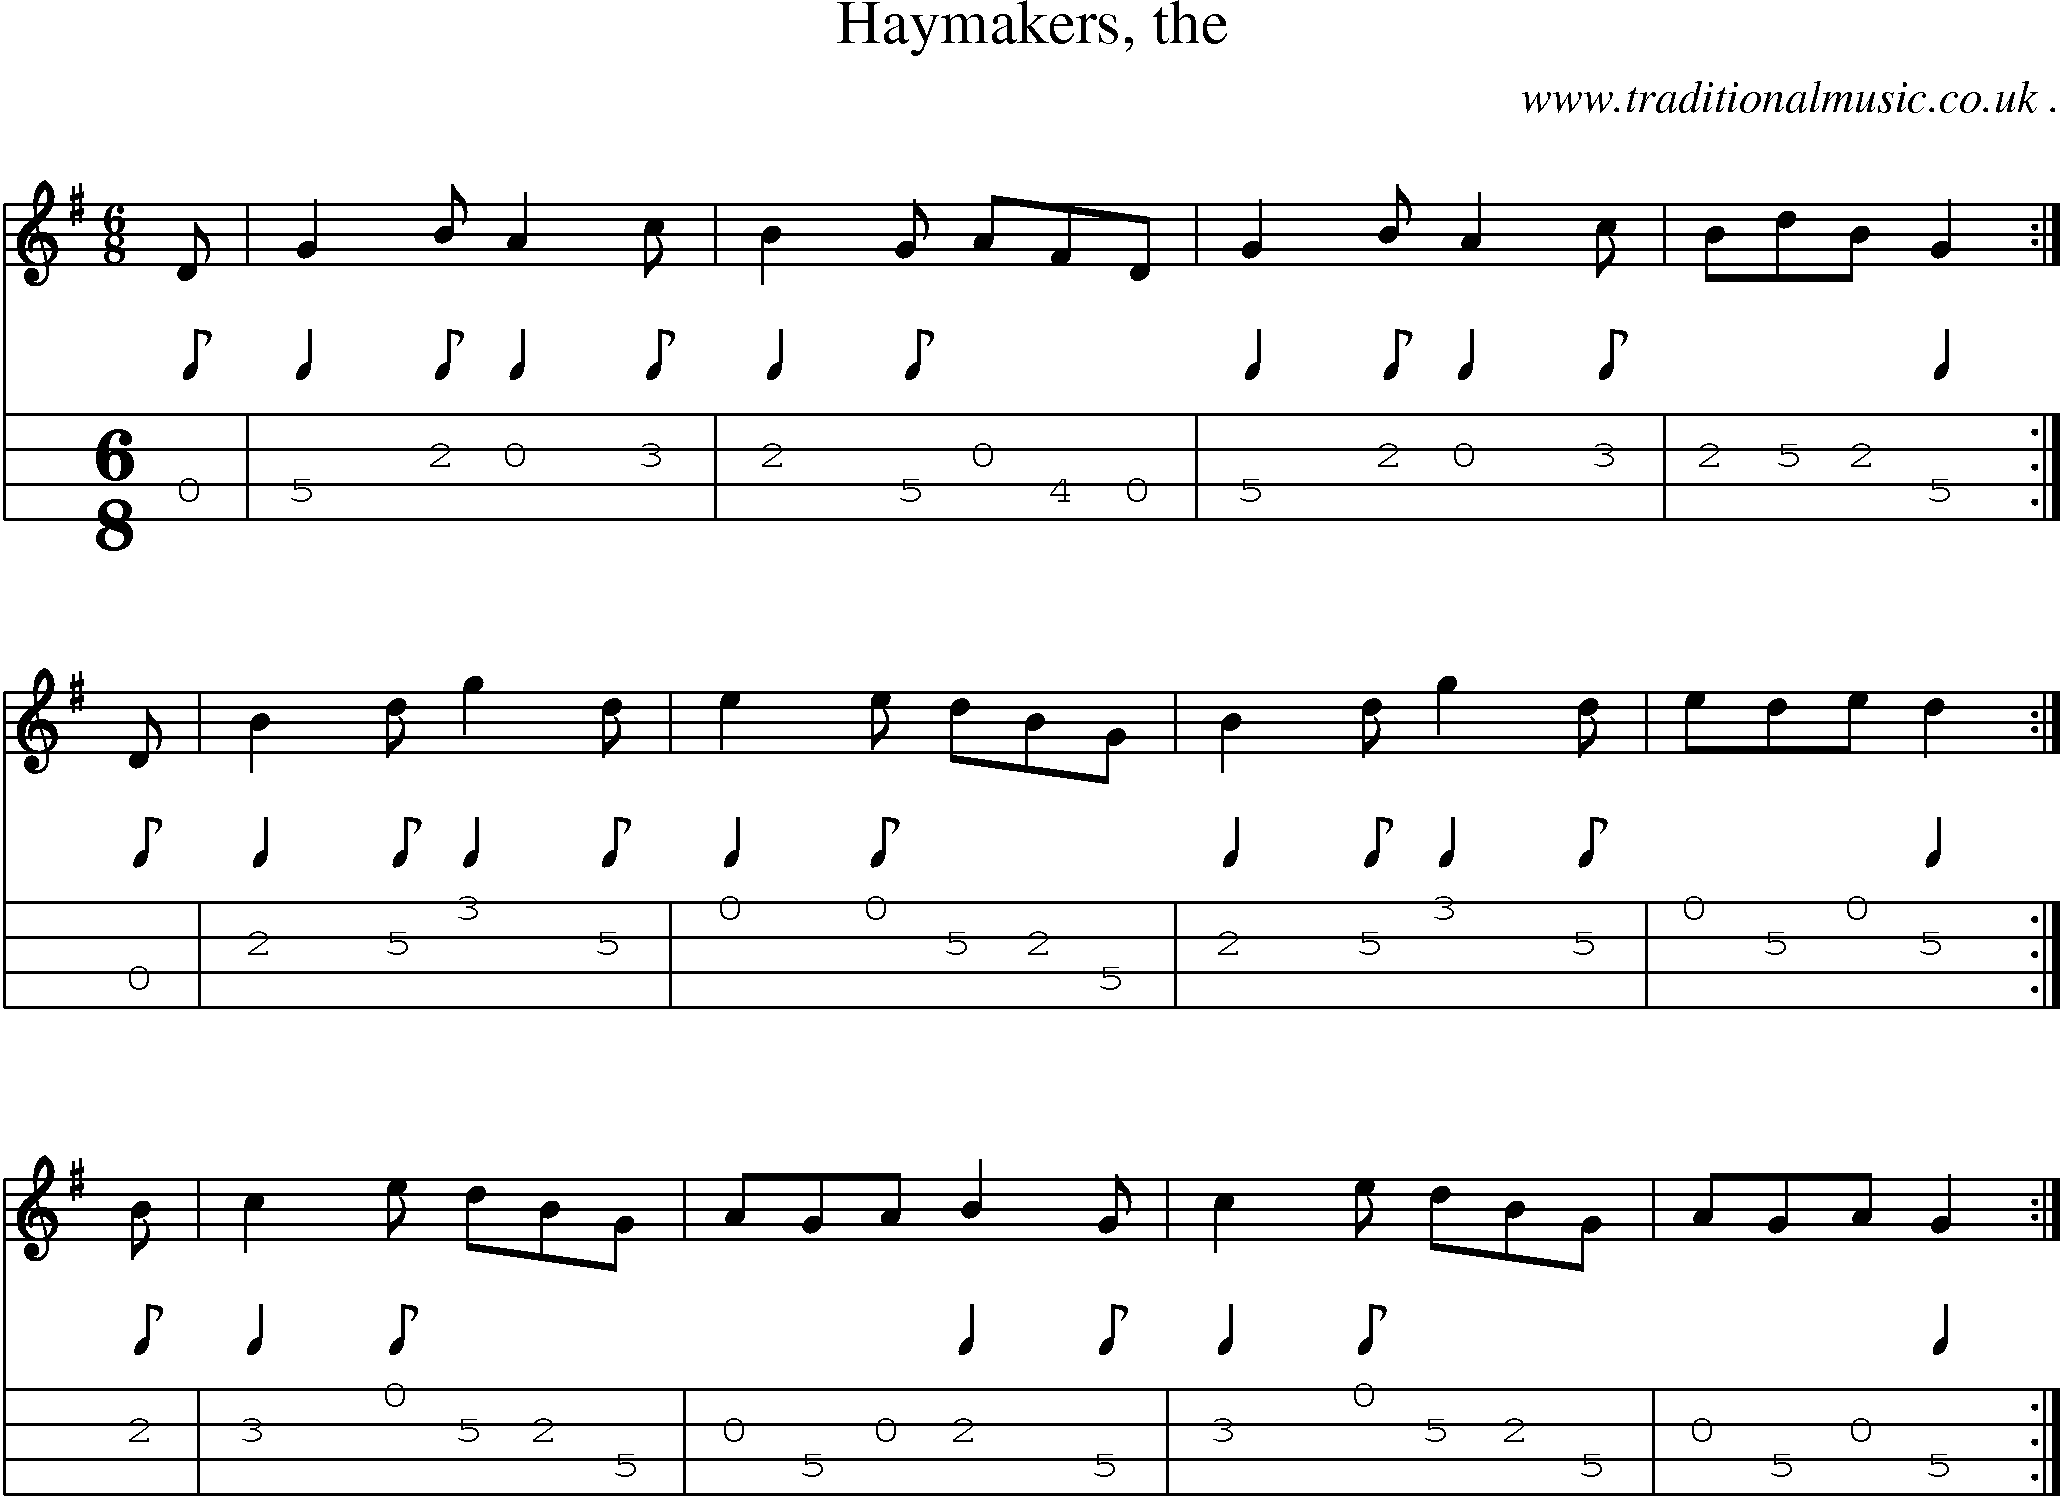 Sheet-music  score, Chords and Mandolin Tabs for Haymakers The